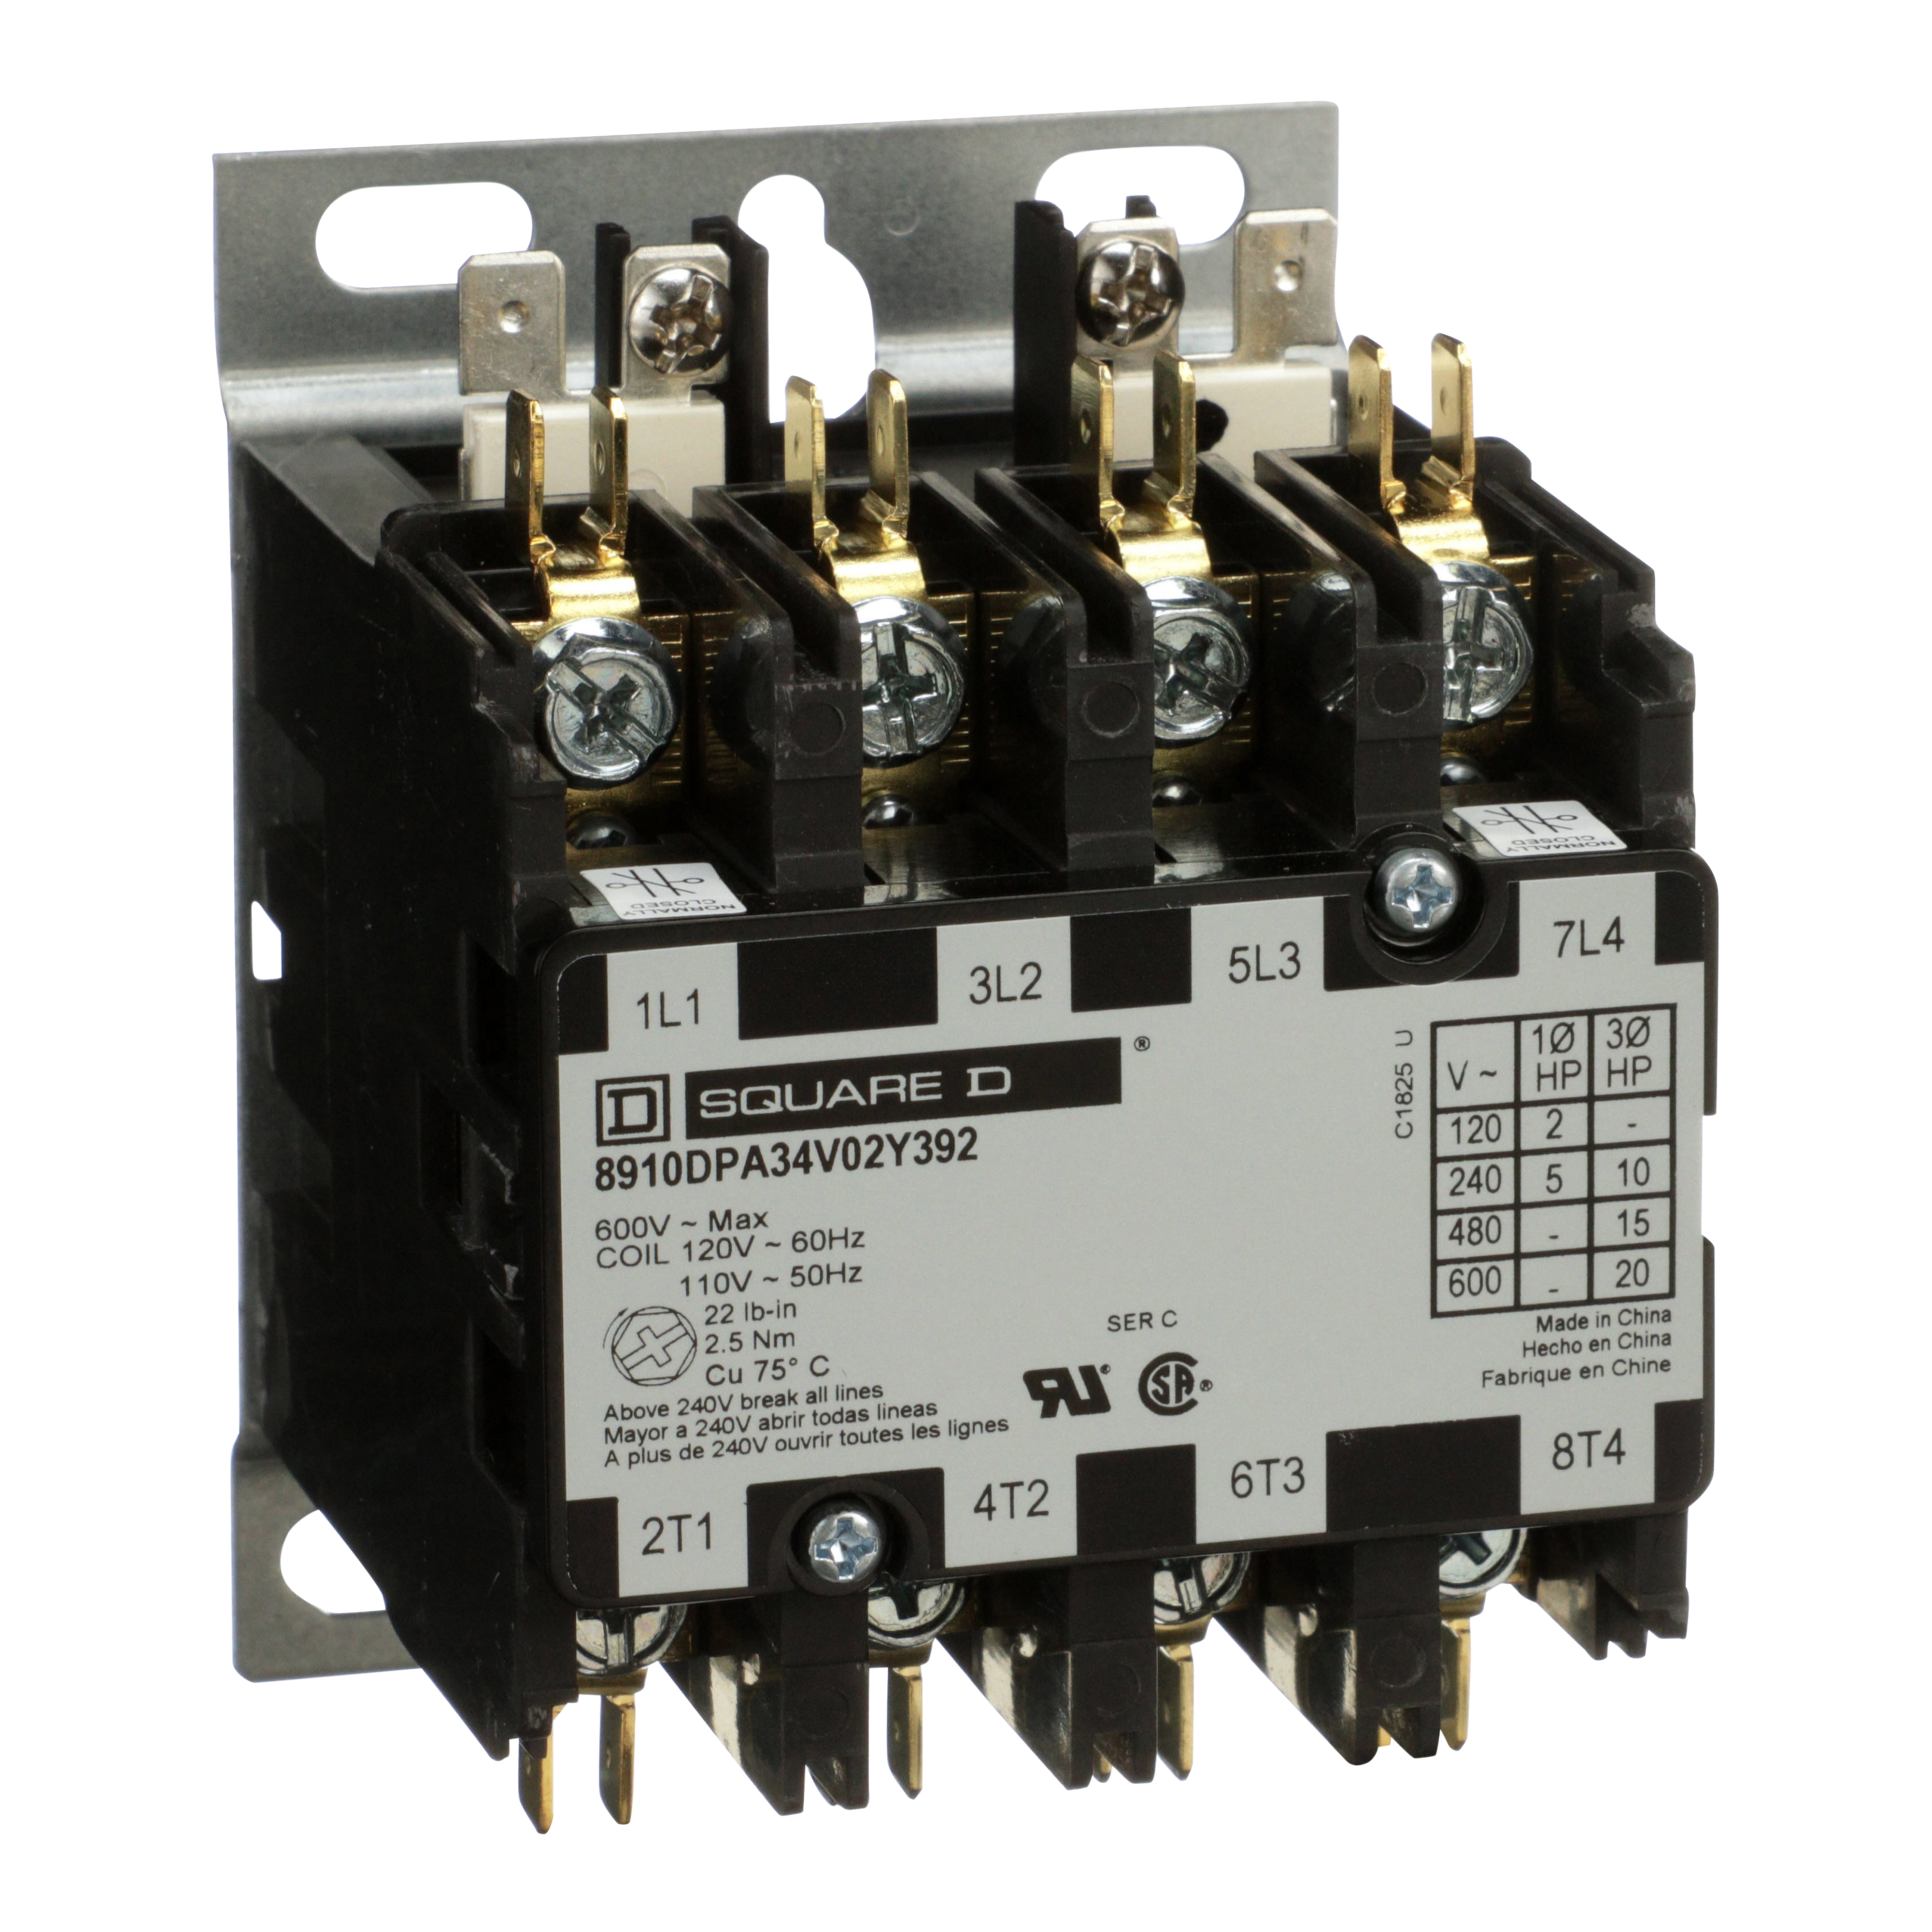 Contactor, Definite Purpose, 30A, 4 pole, 20HP at 575VAC, 3 phase, 110/120VAC 50/60Hz coil, open, 2 NC power poles